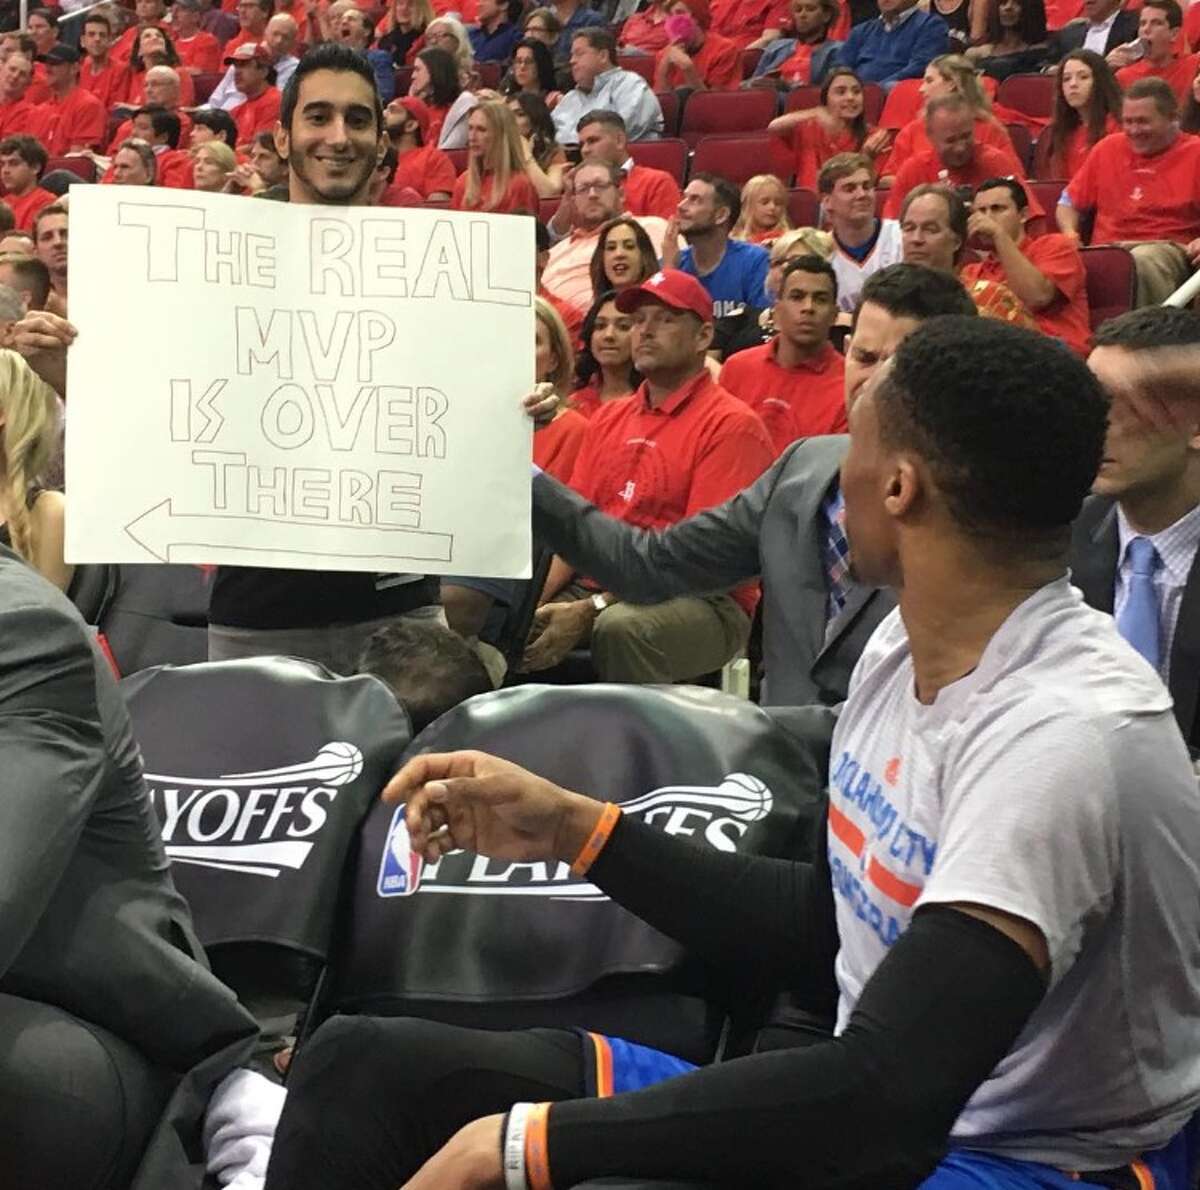 Houston Rockets fan Keeyan Sabz holds up a sign behind the NBA's 2016-17 likely Most Valuable Player, Russell Westbrook of the Oklahoma City Thunder, Tuesday April 24, 2017, during the Rockets playoff victory over the Thunder at Toyota Center. The sign, which says "The real MVP is over there," points toward Rockets guard James Harden. (Photo: Keeyan Sabz)